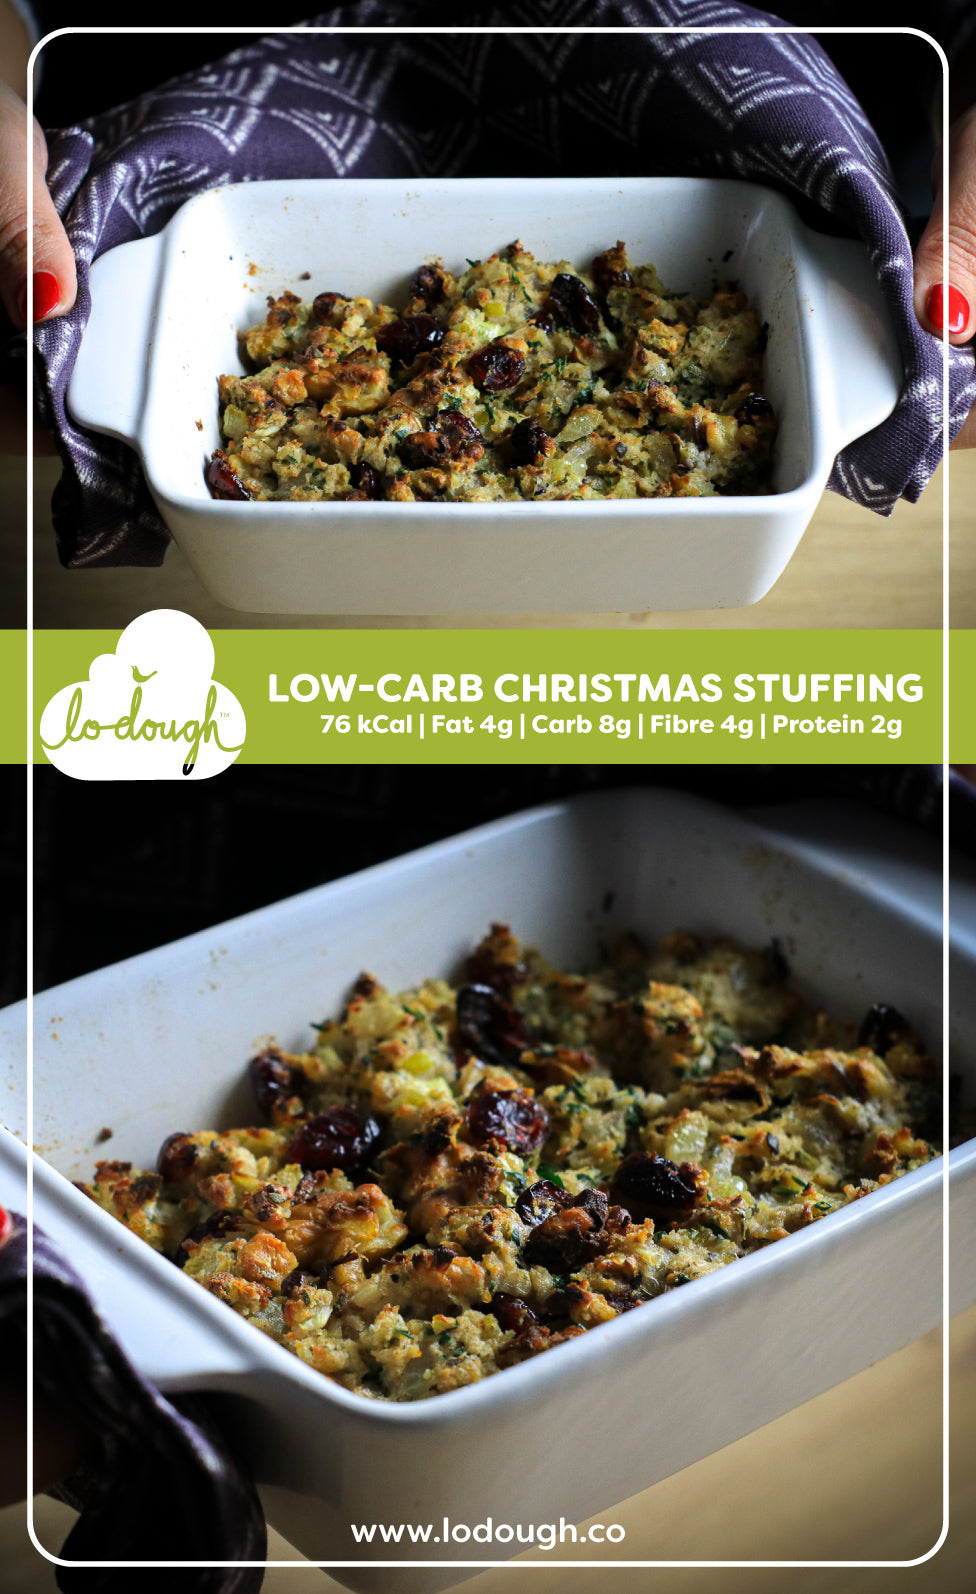 Low-Carb Stuffing